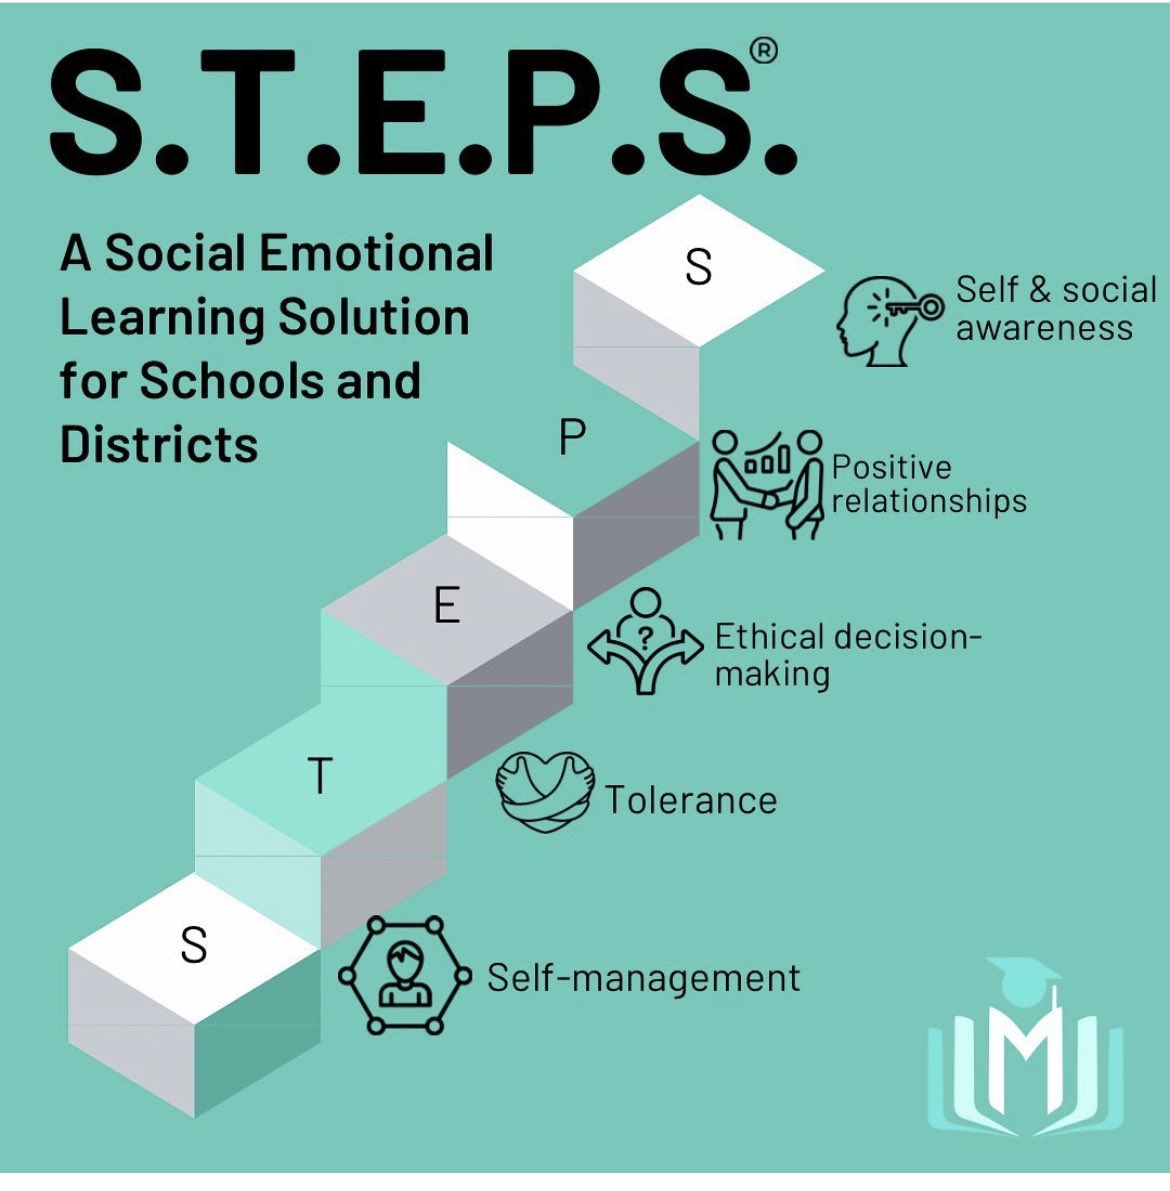 We have a Social Emotional Learning (SEL) plan, S.T.E.P.S., that is proven to positively change the climate of your school and district. Contact us today to help you develop your SEL plan for the 2023-2024 school year. 

#PositiveCulture #SEL #SocialEmotionalLearning